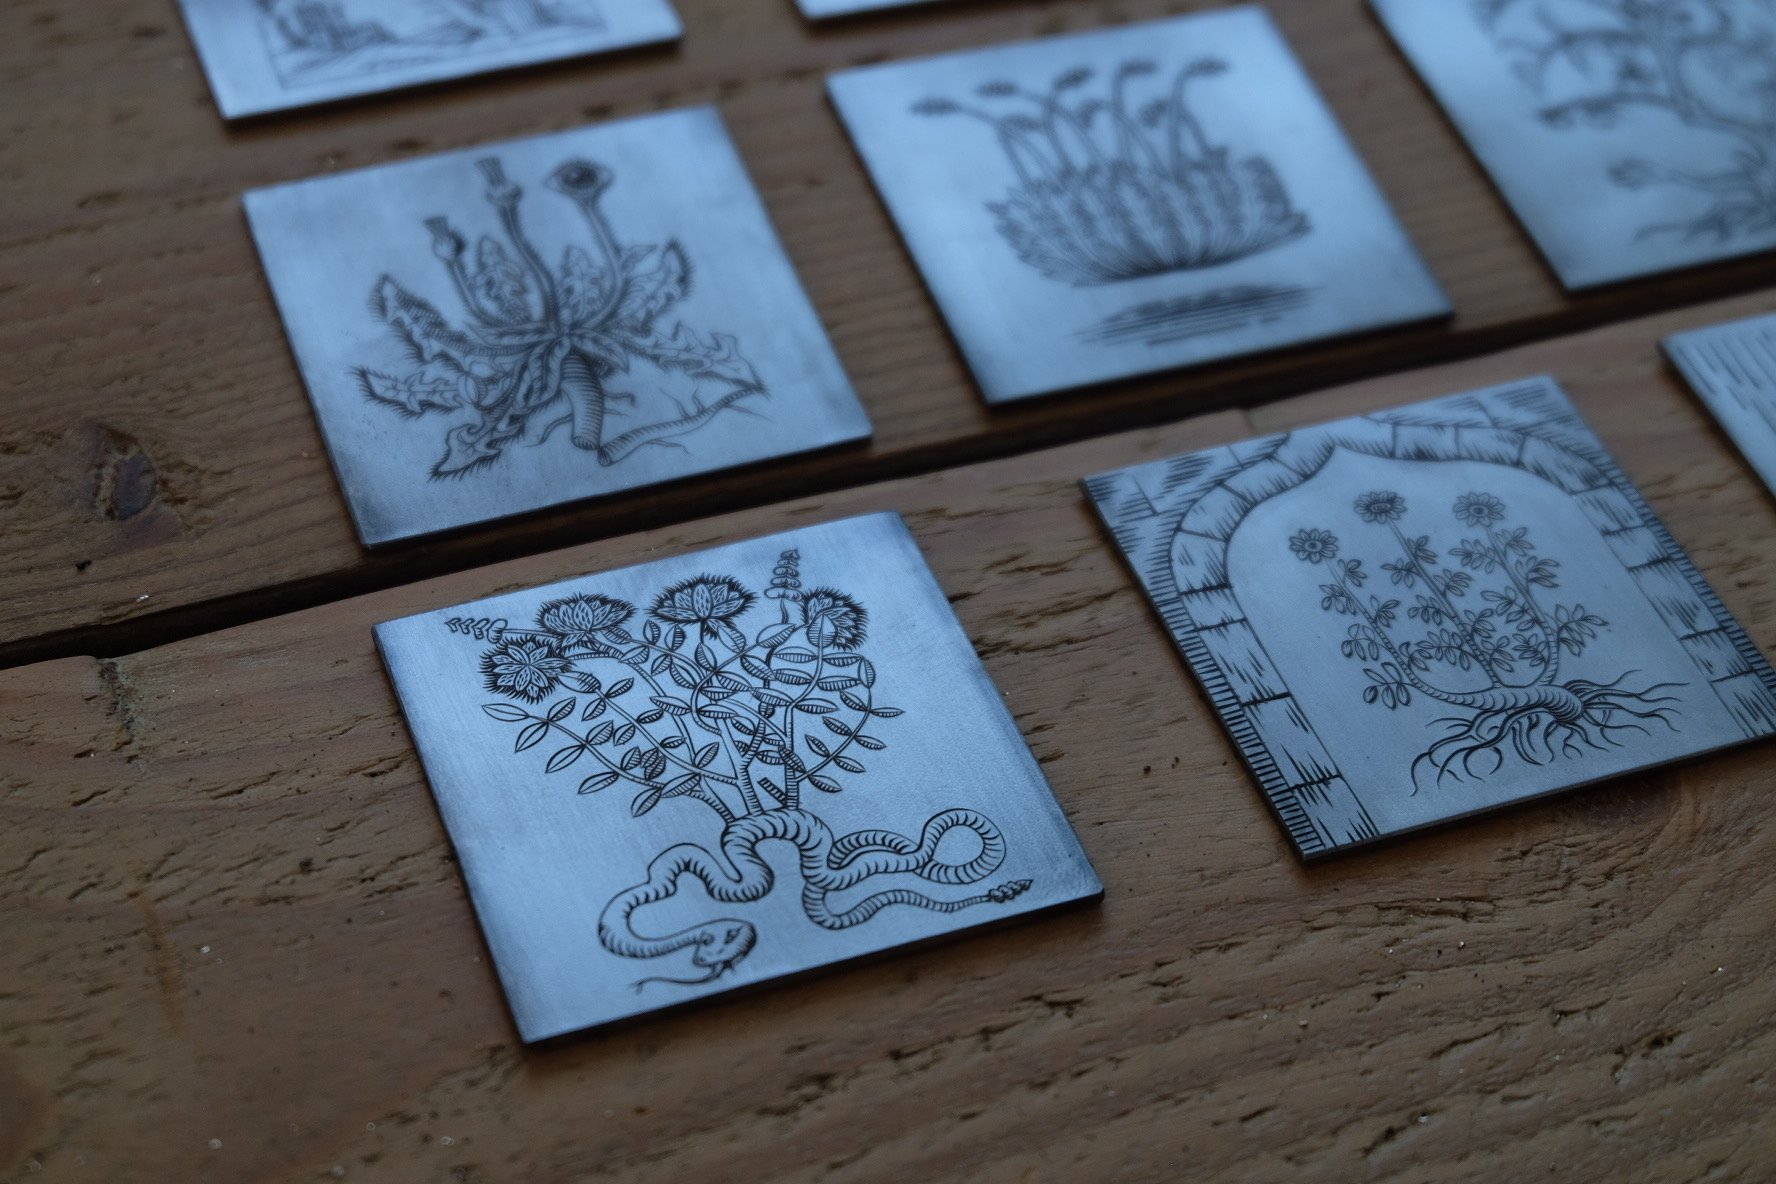  “I was really inspired by a lot of the books in the collection […] I would engrave these little plates based off of some of the plant specimens I was seeing.” -Brien Beidler 